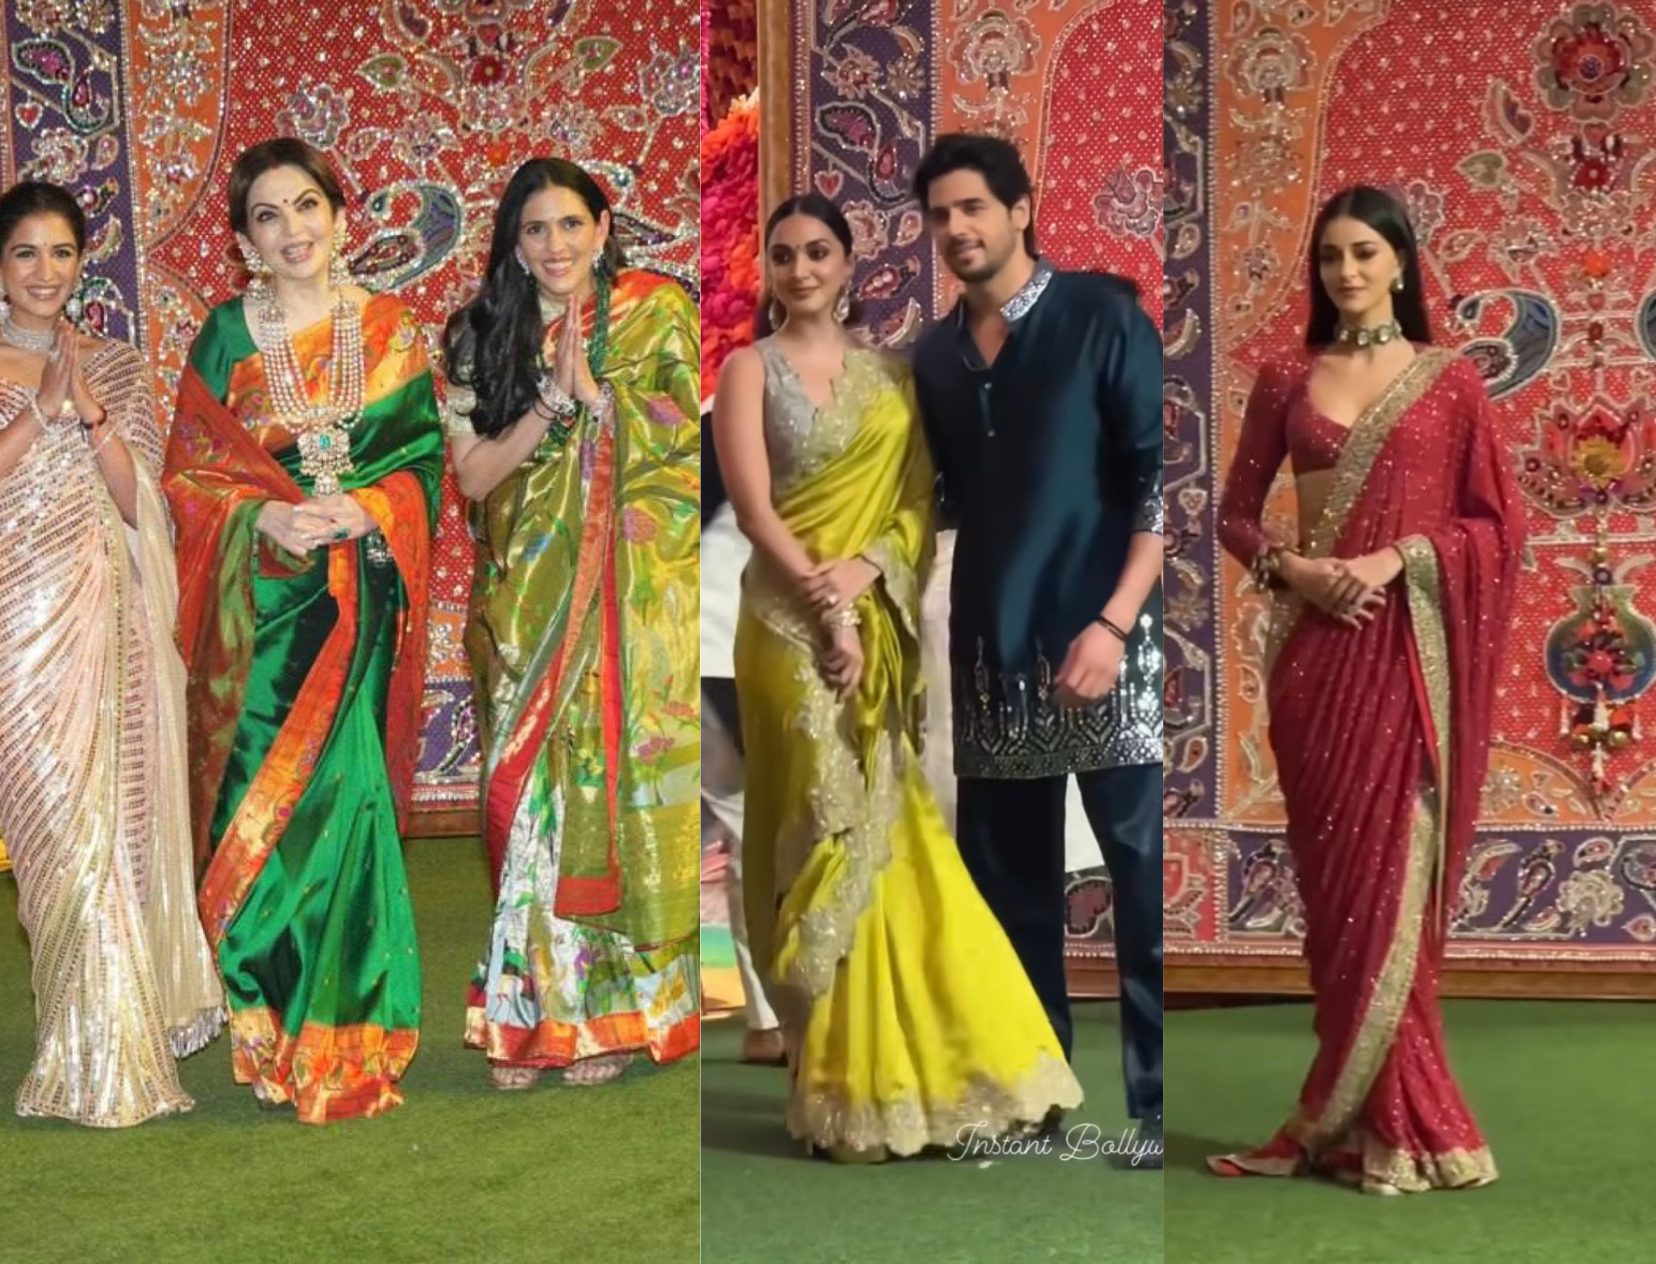 All The Looks From Ambani Family’s Biggest-Ever Ganesh Chaturthi Event!